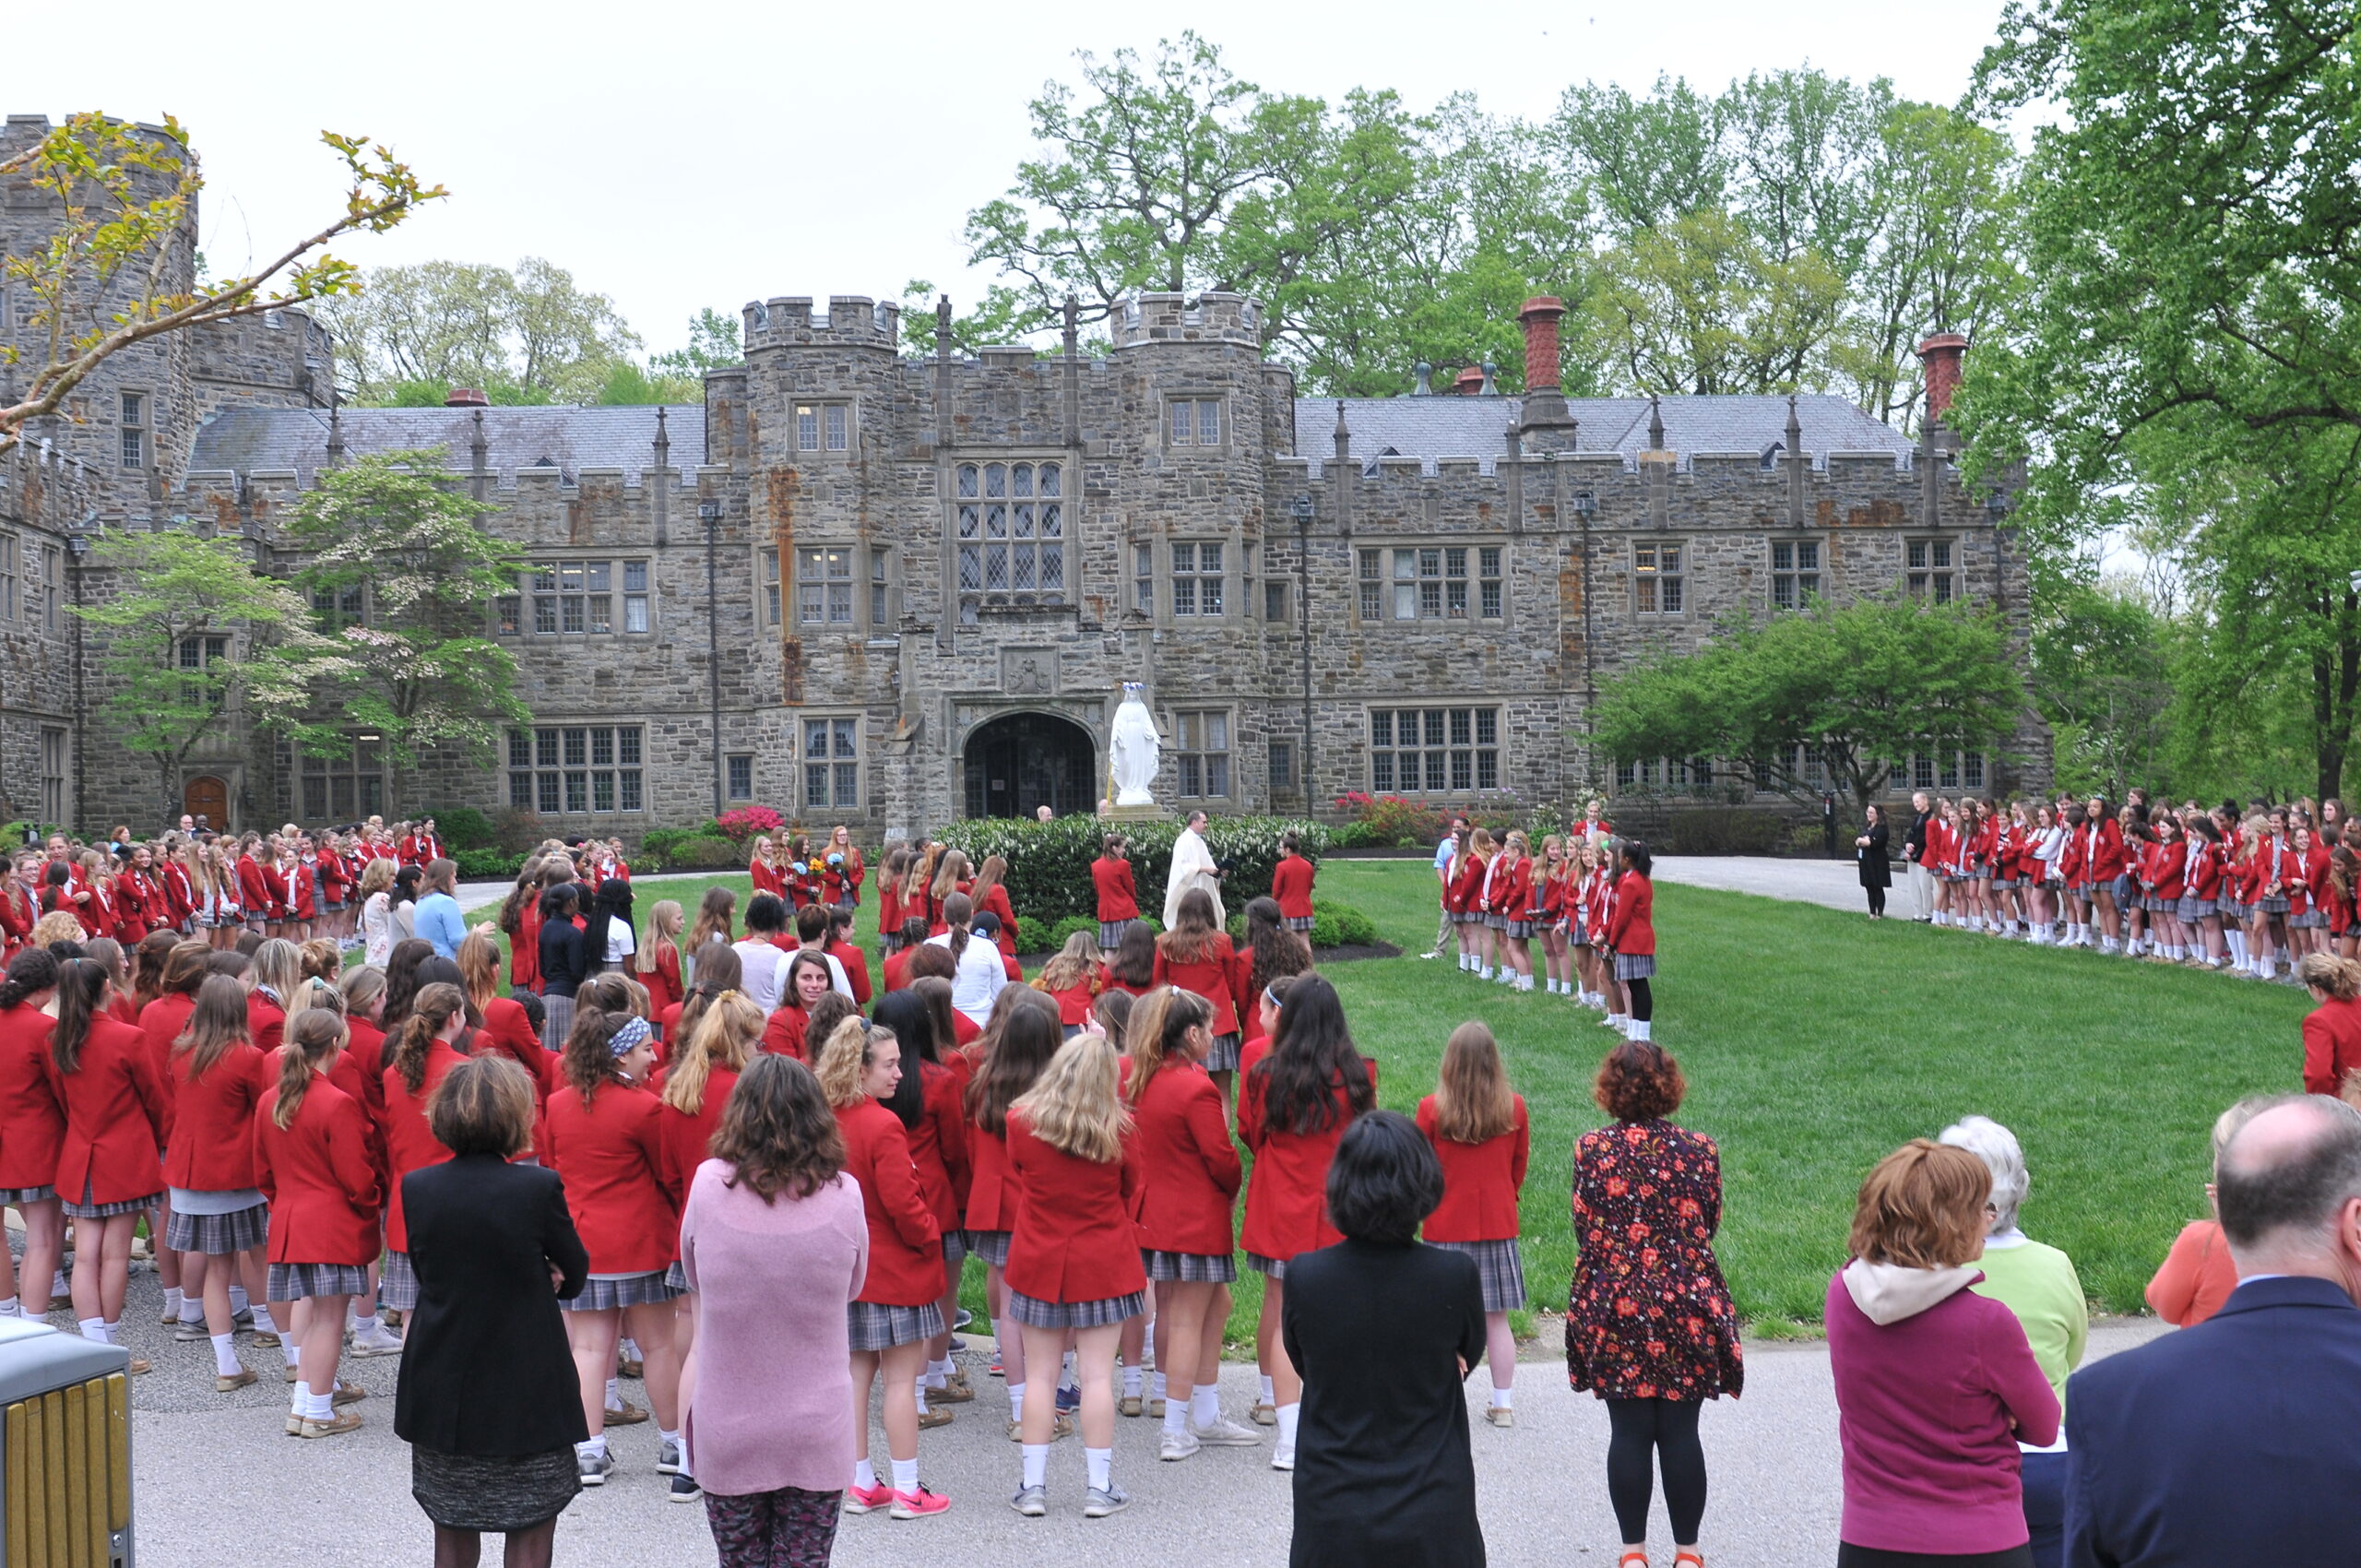 A large number of students arranged on the school grounds